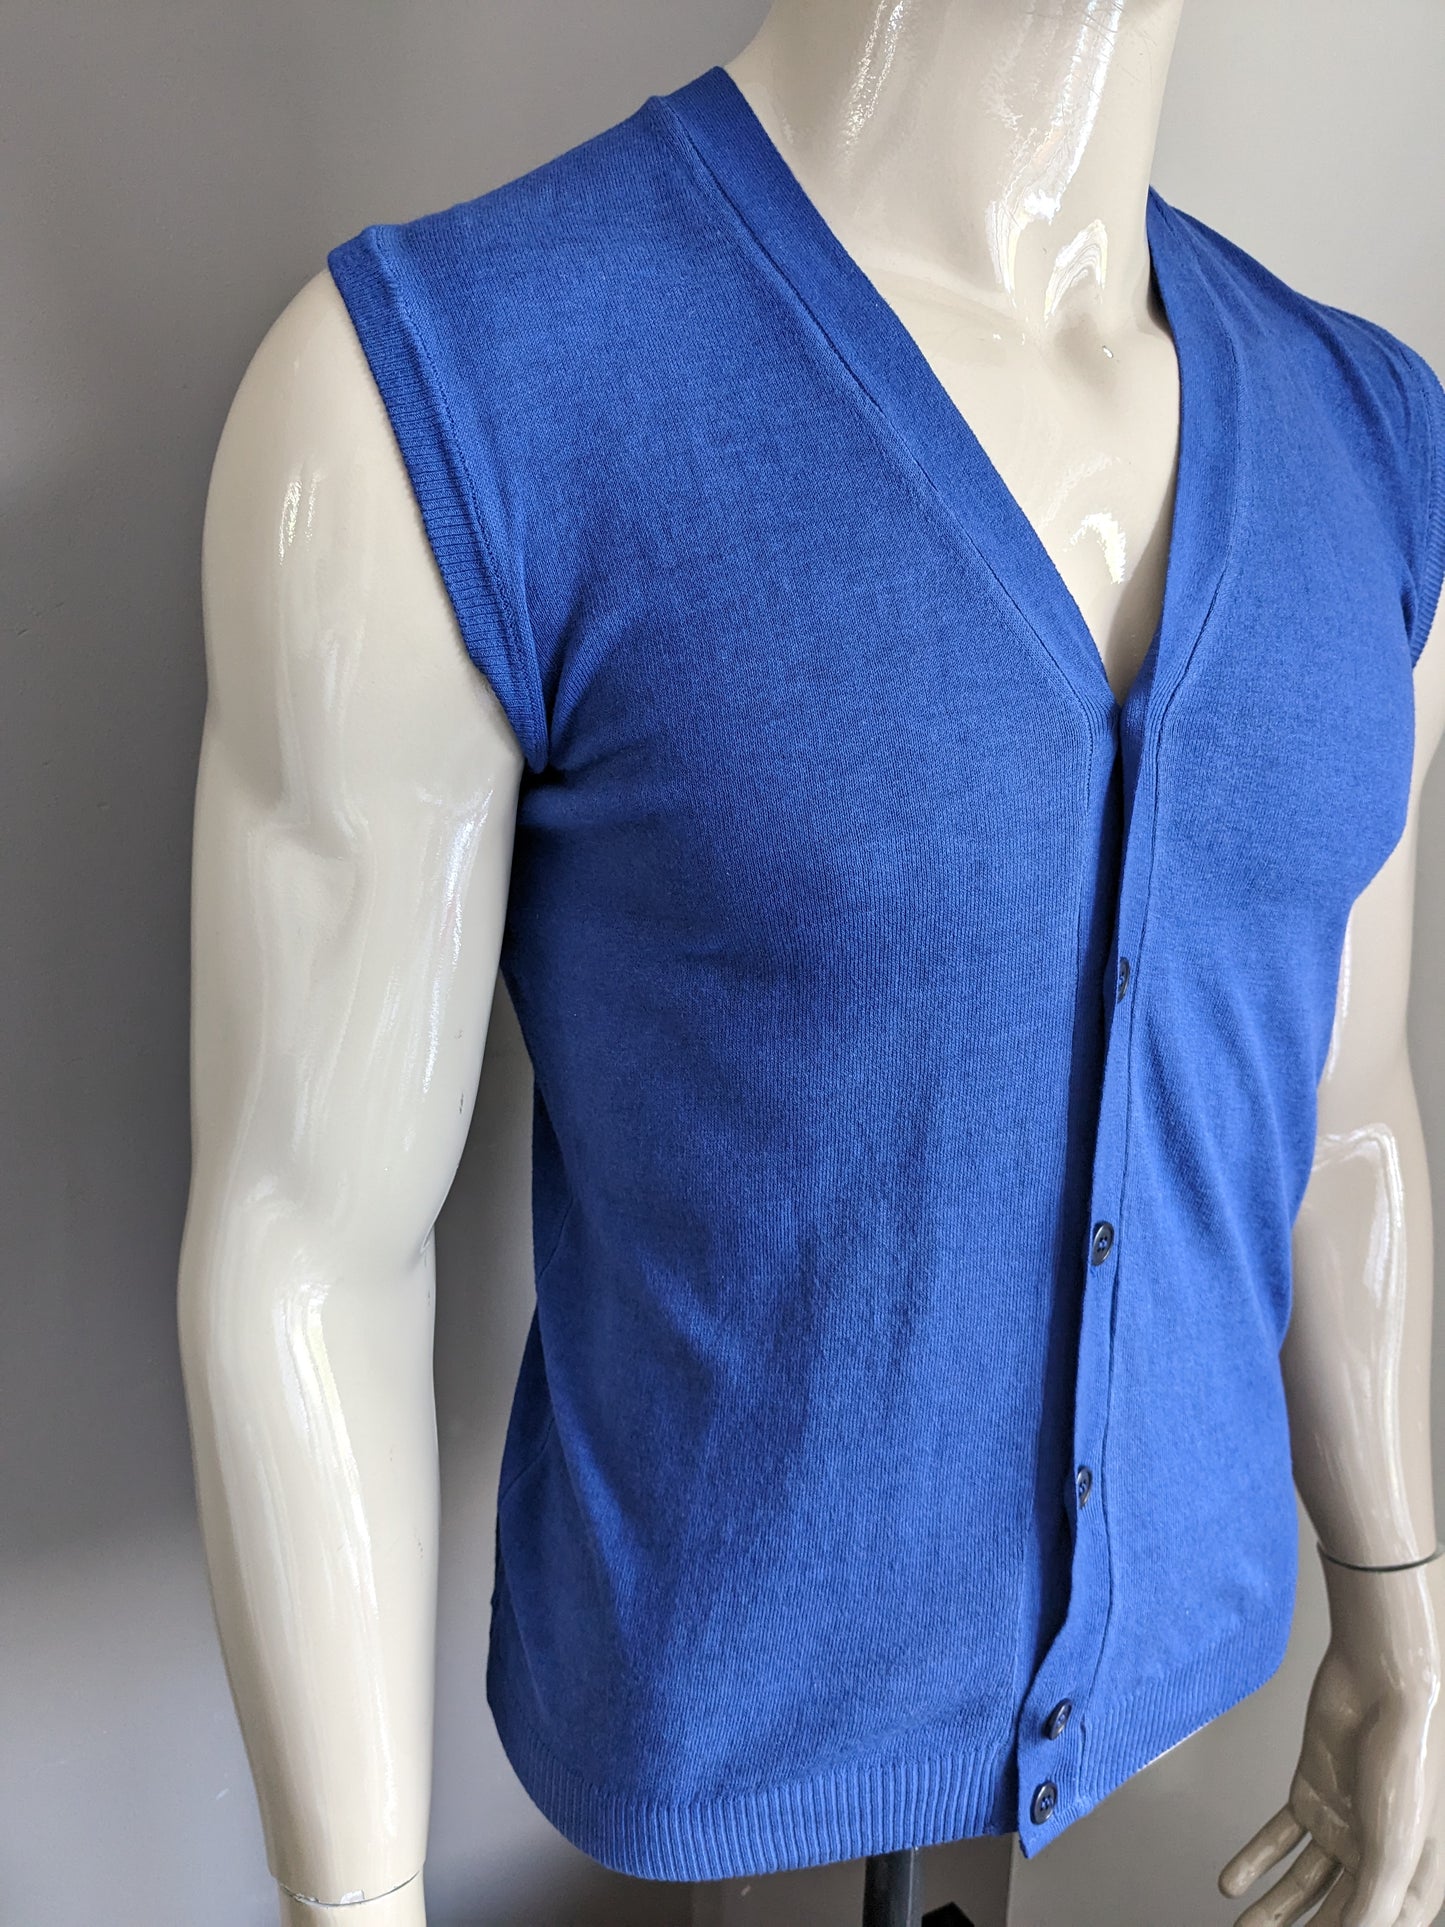 Wool & Co Cotton waistcoat. Blue colored. Size S.